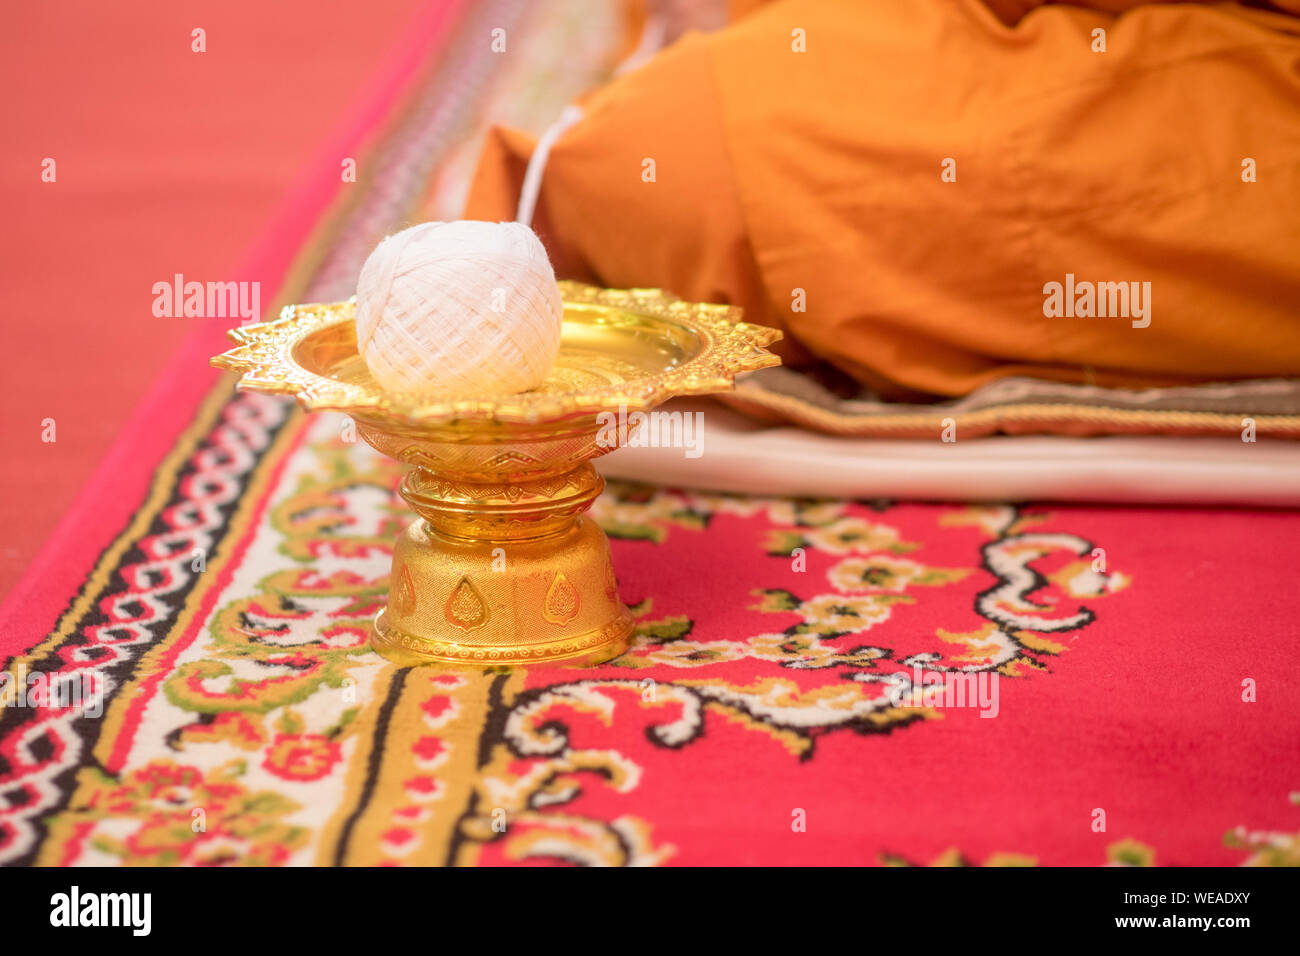 Close-up Of Thread Spool On Container During Wedding Ceremony Stock Photo